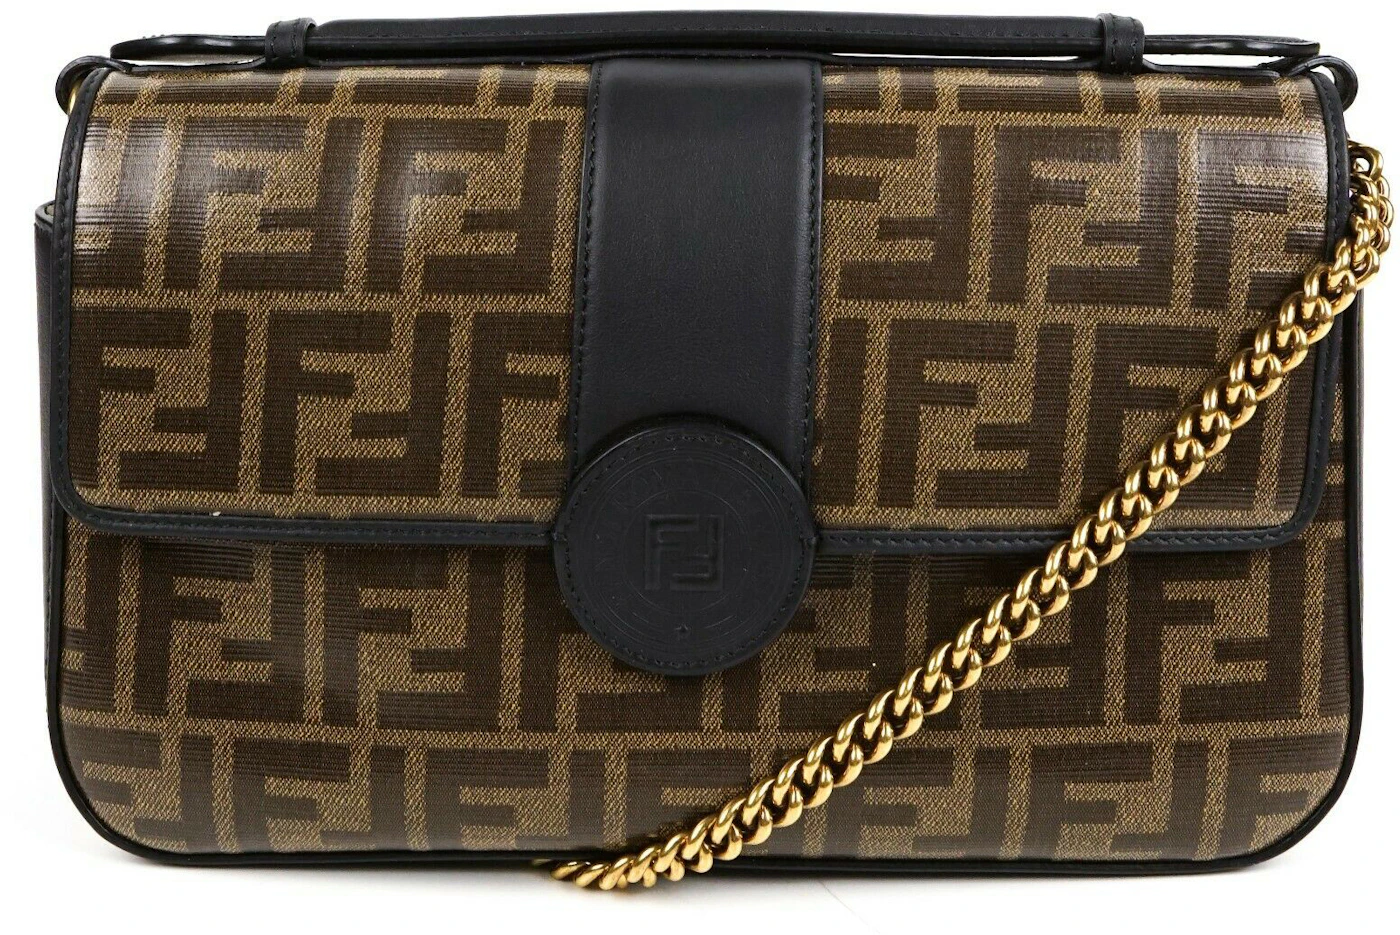 Fendi Double Shoulder Bag F Brown/Black in Coated Canvas/Leather with ...